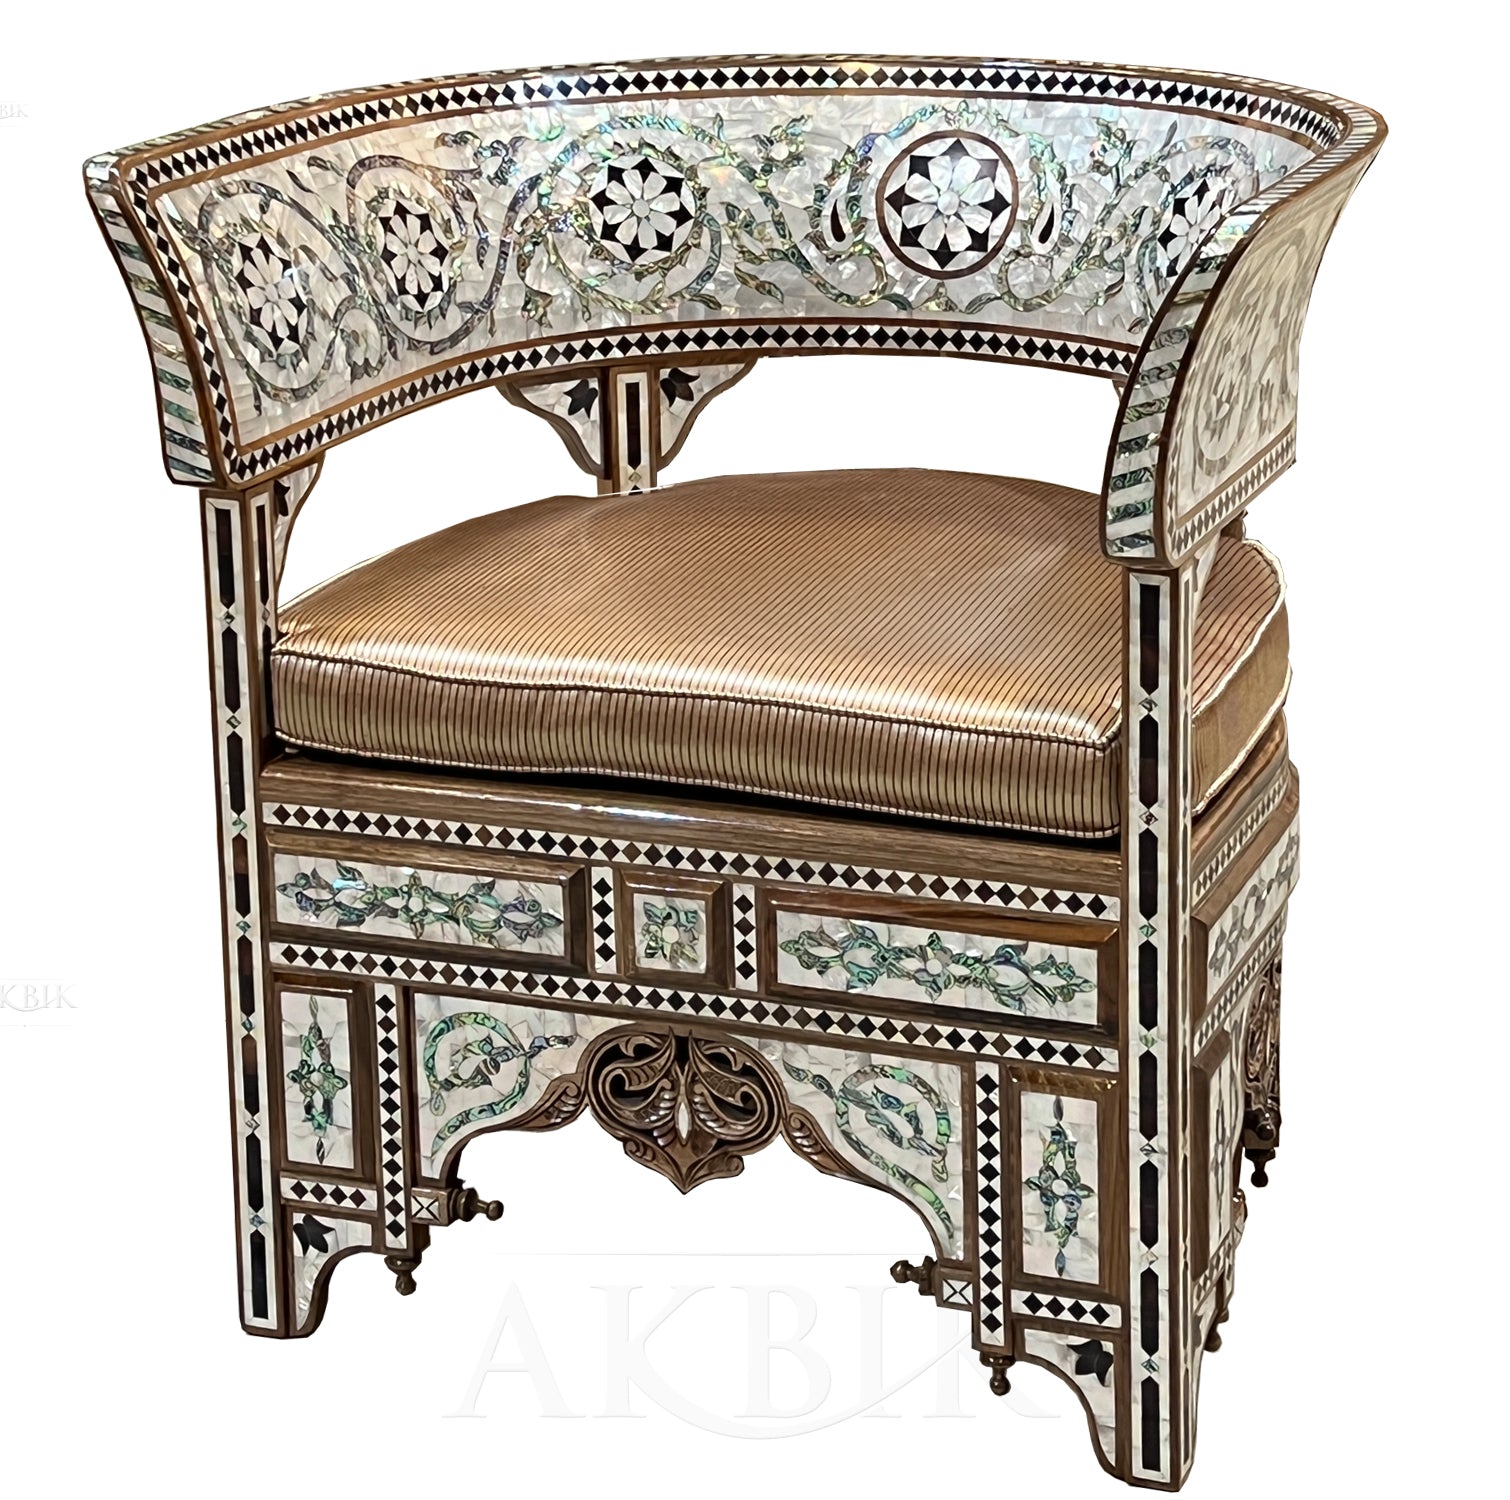 Celestial Waves Chair: Abalone & Mother of Pearl Inlay